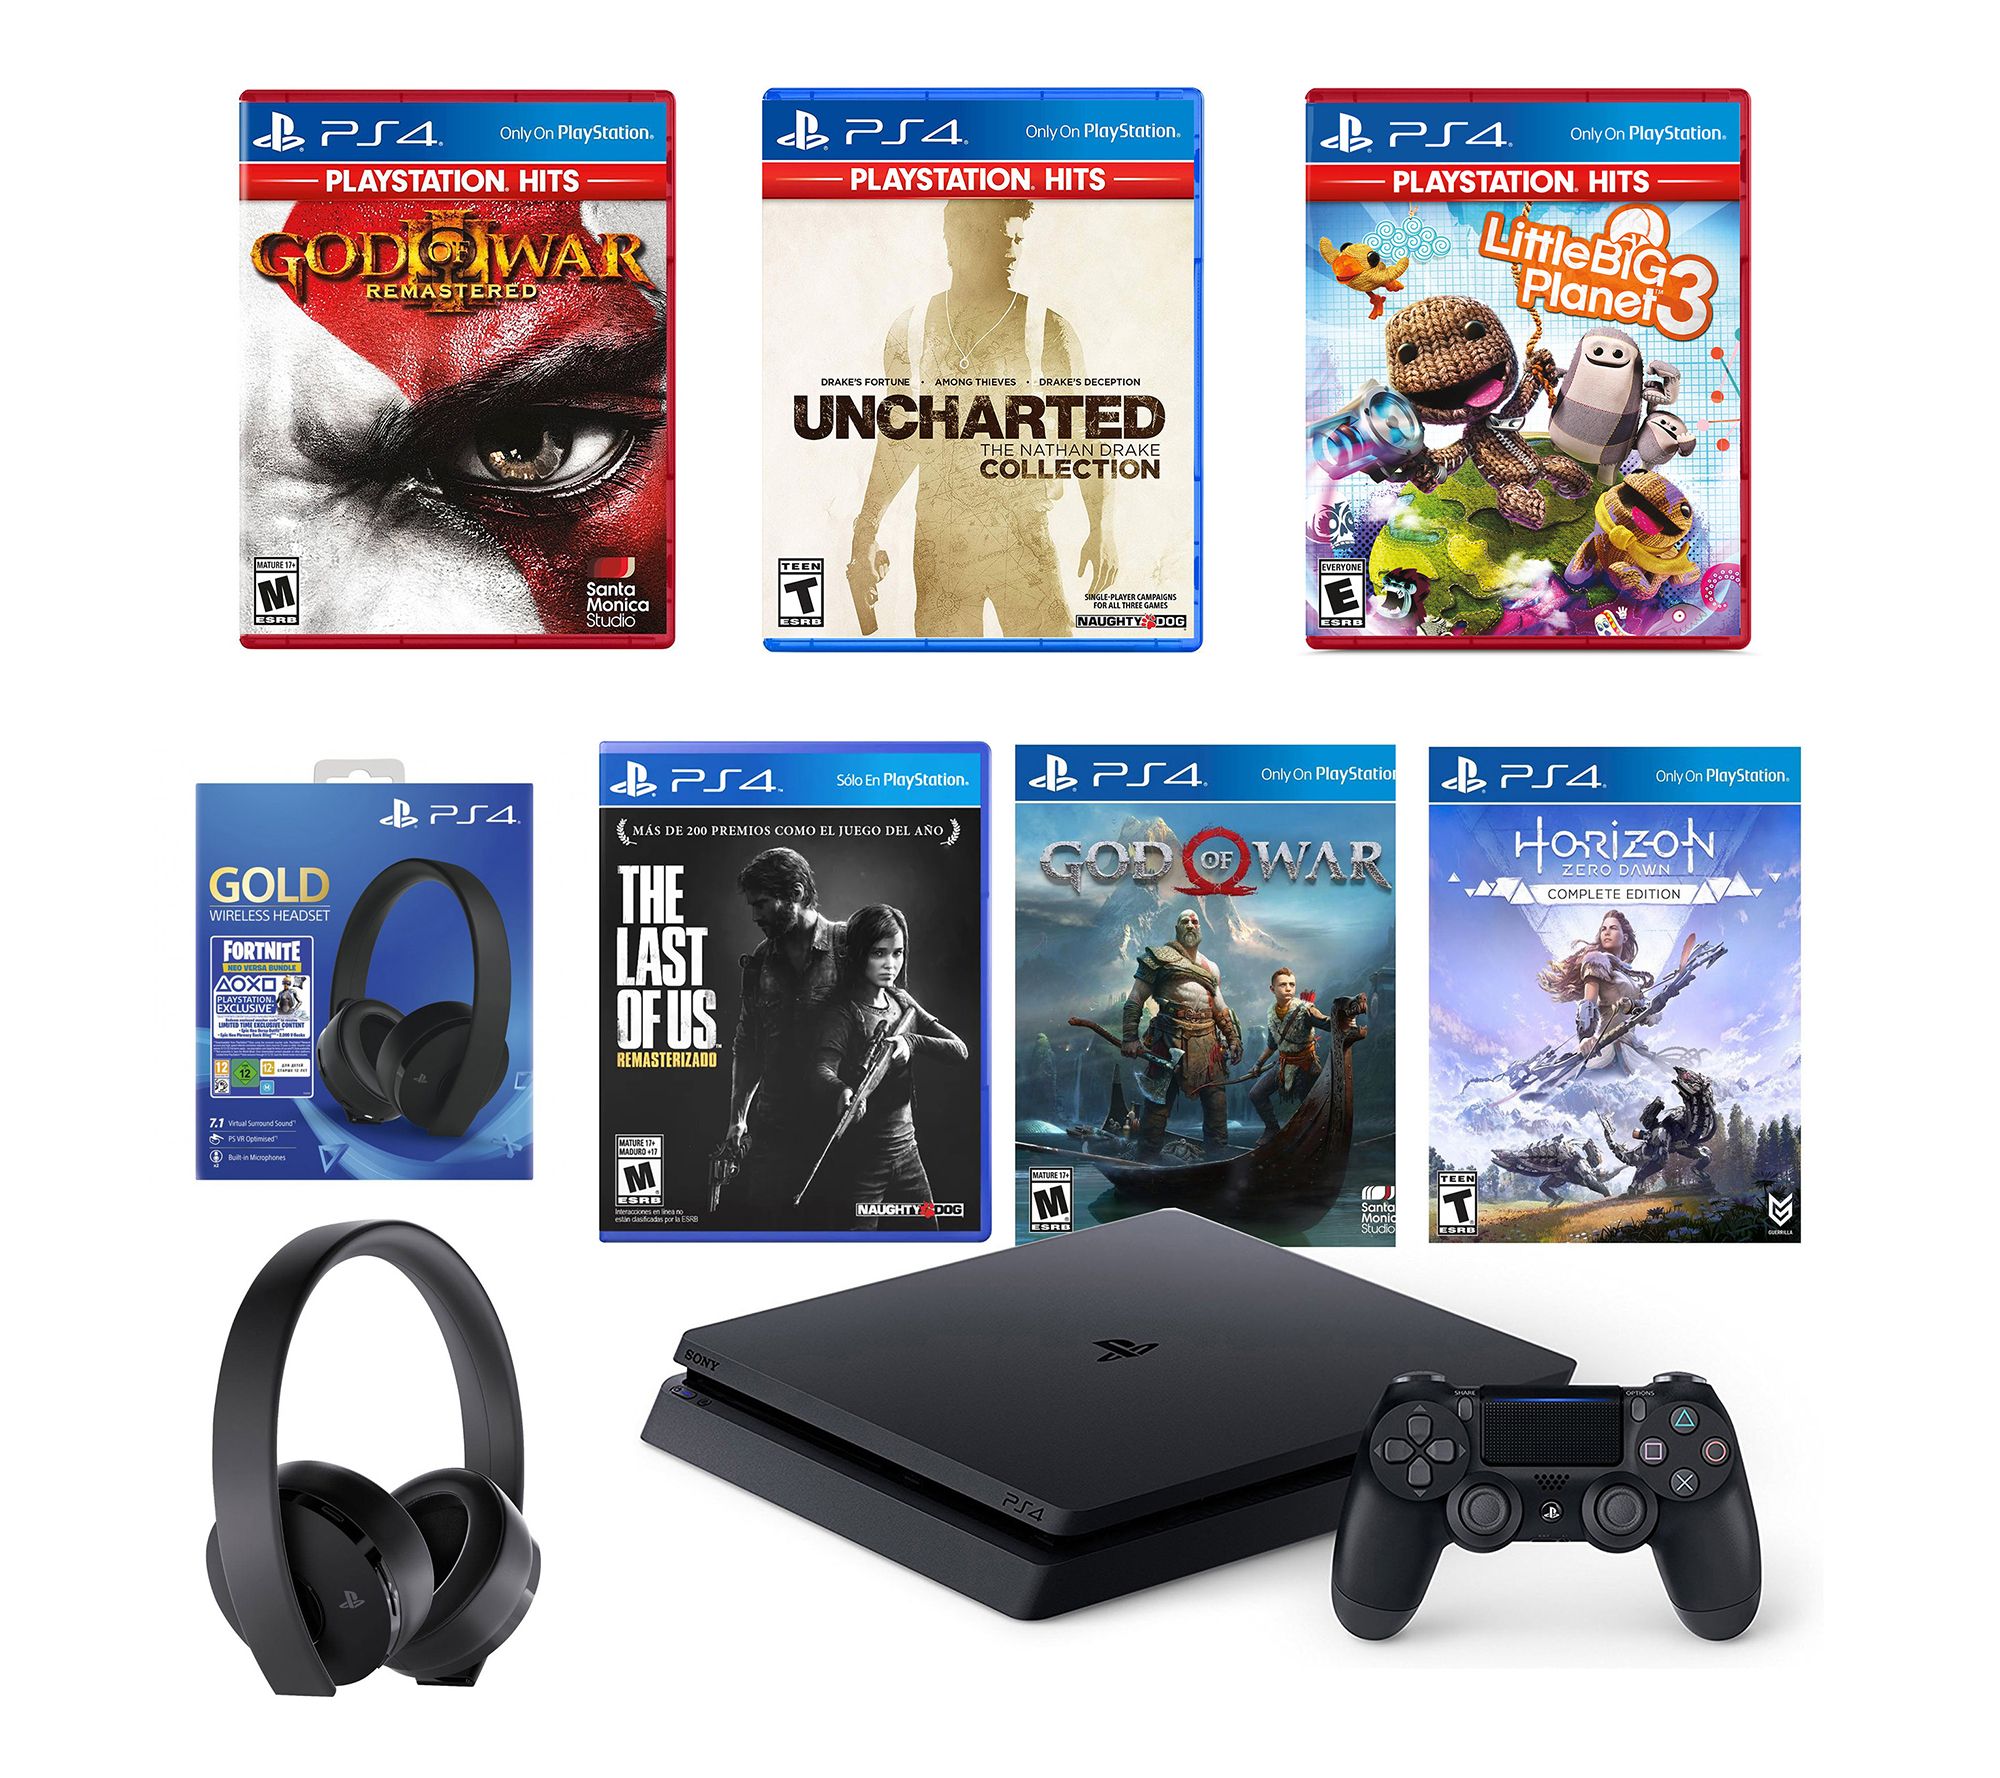 Can The Last of Us 2 PS4 Pro bundle tempt you away from the PS5?